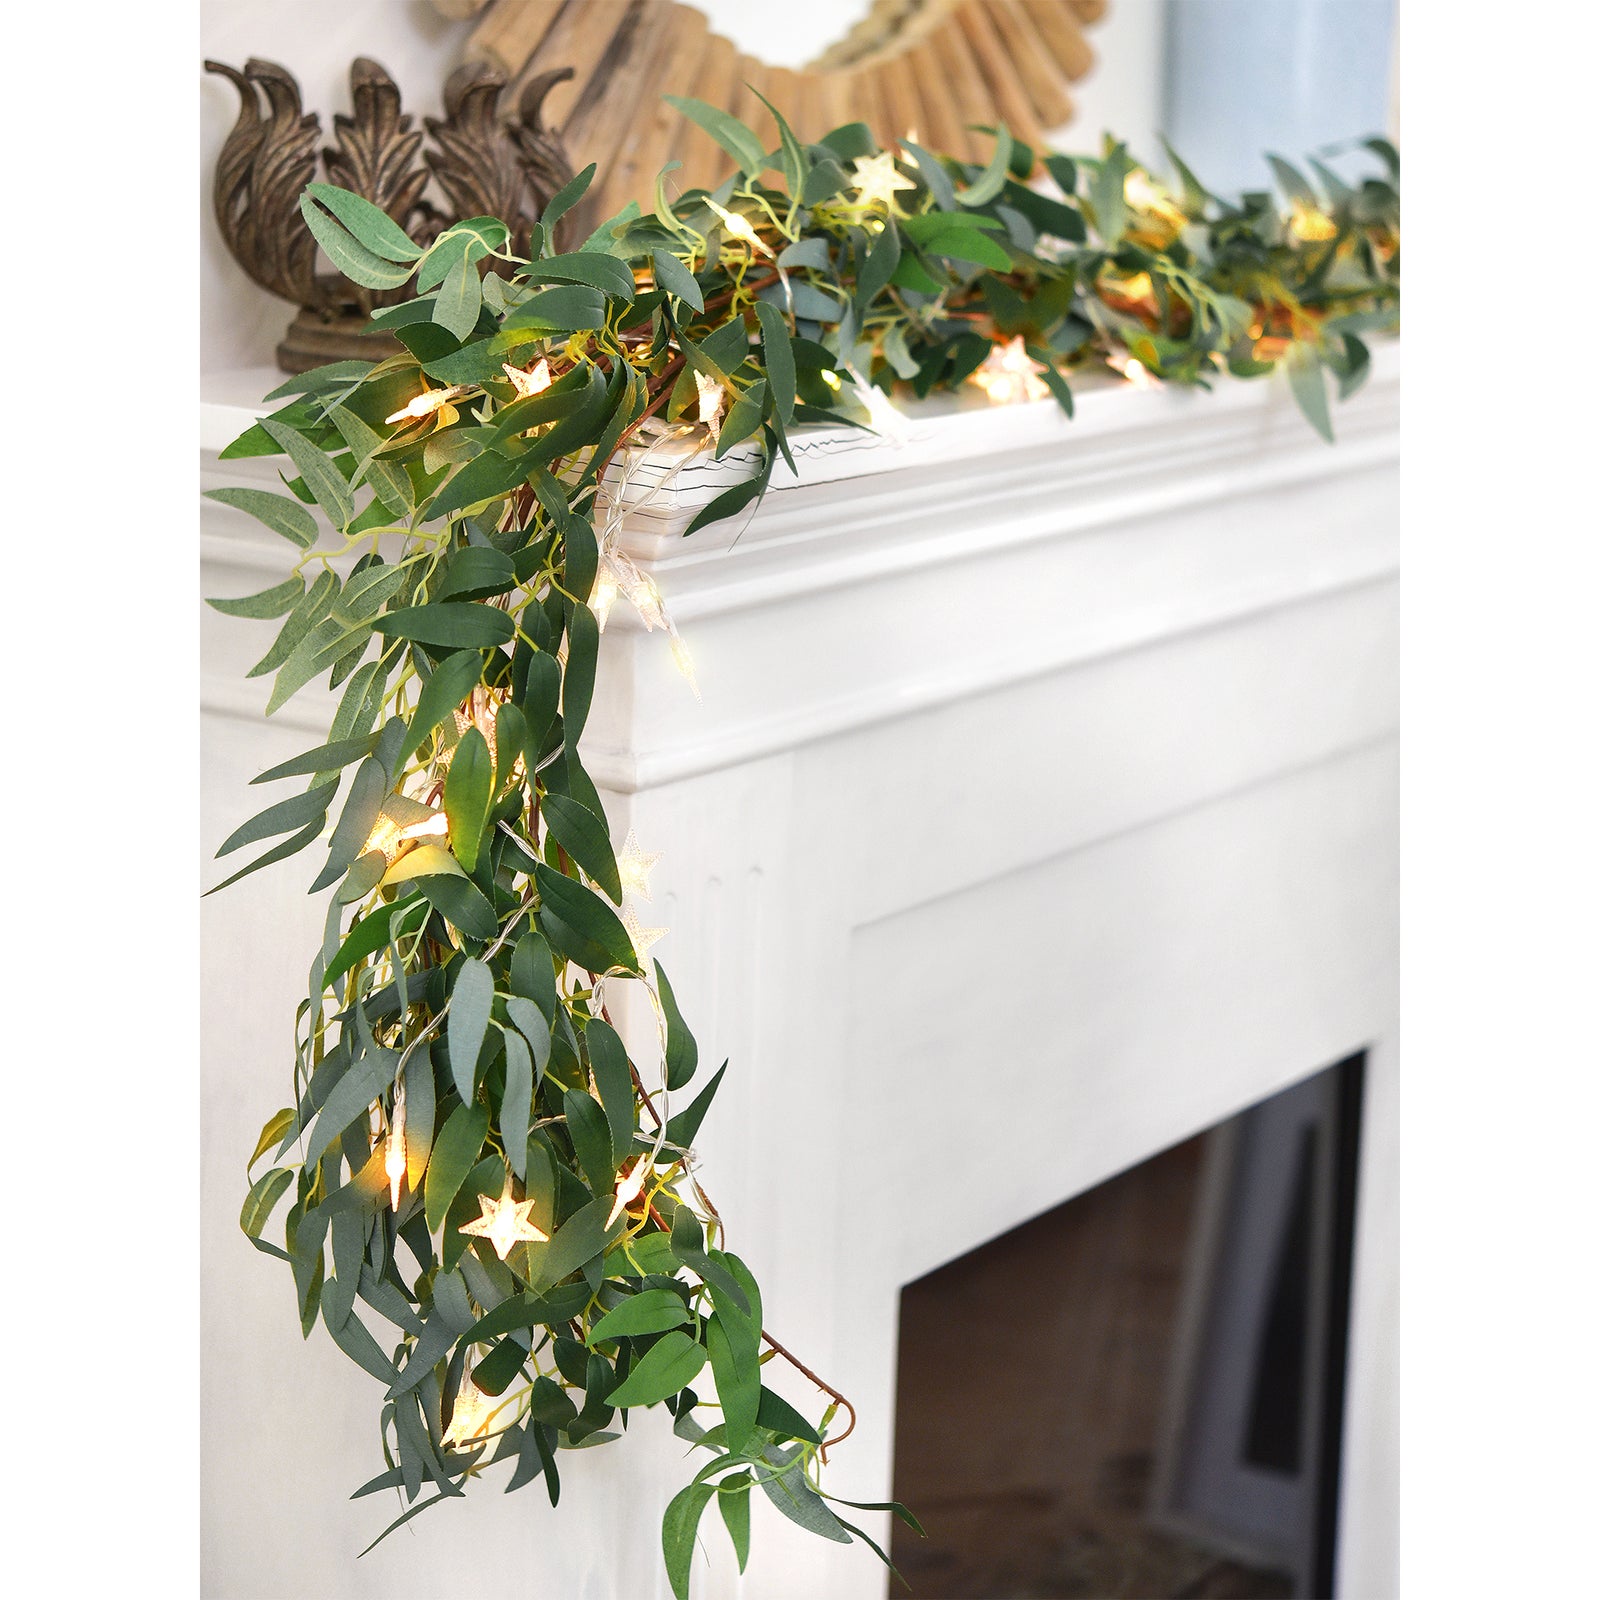 Enchanting Decor: Pair of Flexible Rustic Willow Garlands adorned with 33 Feet Starry String Lights (USB Operated) by FiveSeasonStuff Floral